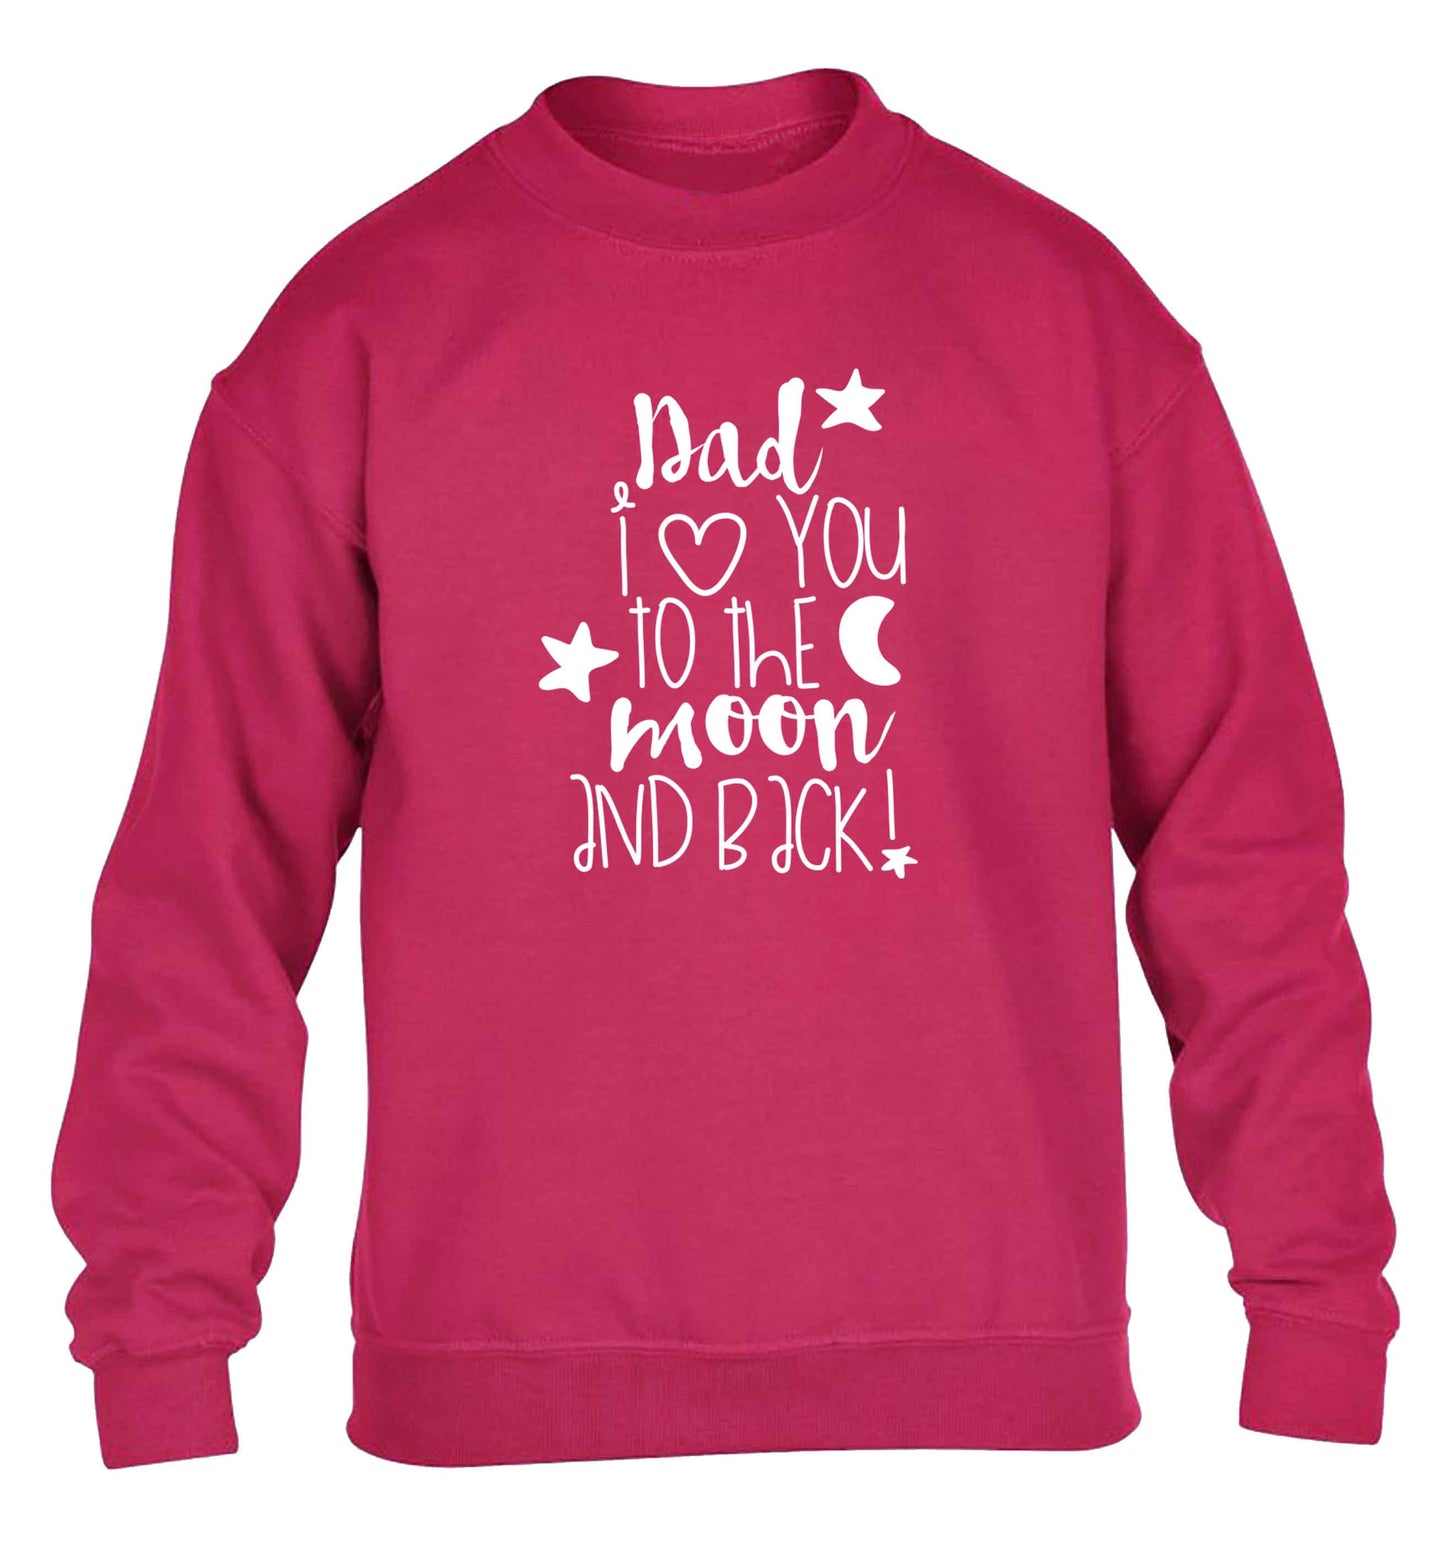 Dad I love you to the moon and back children's pink sweater 12-13 Years